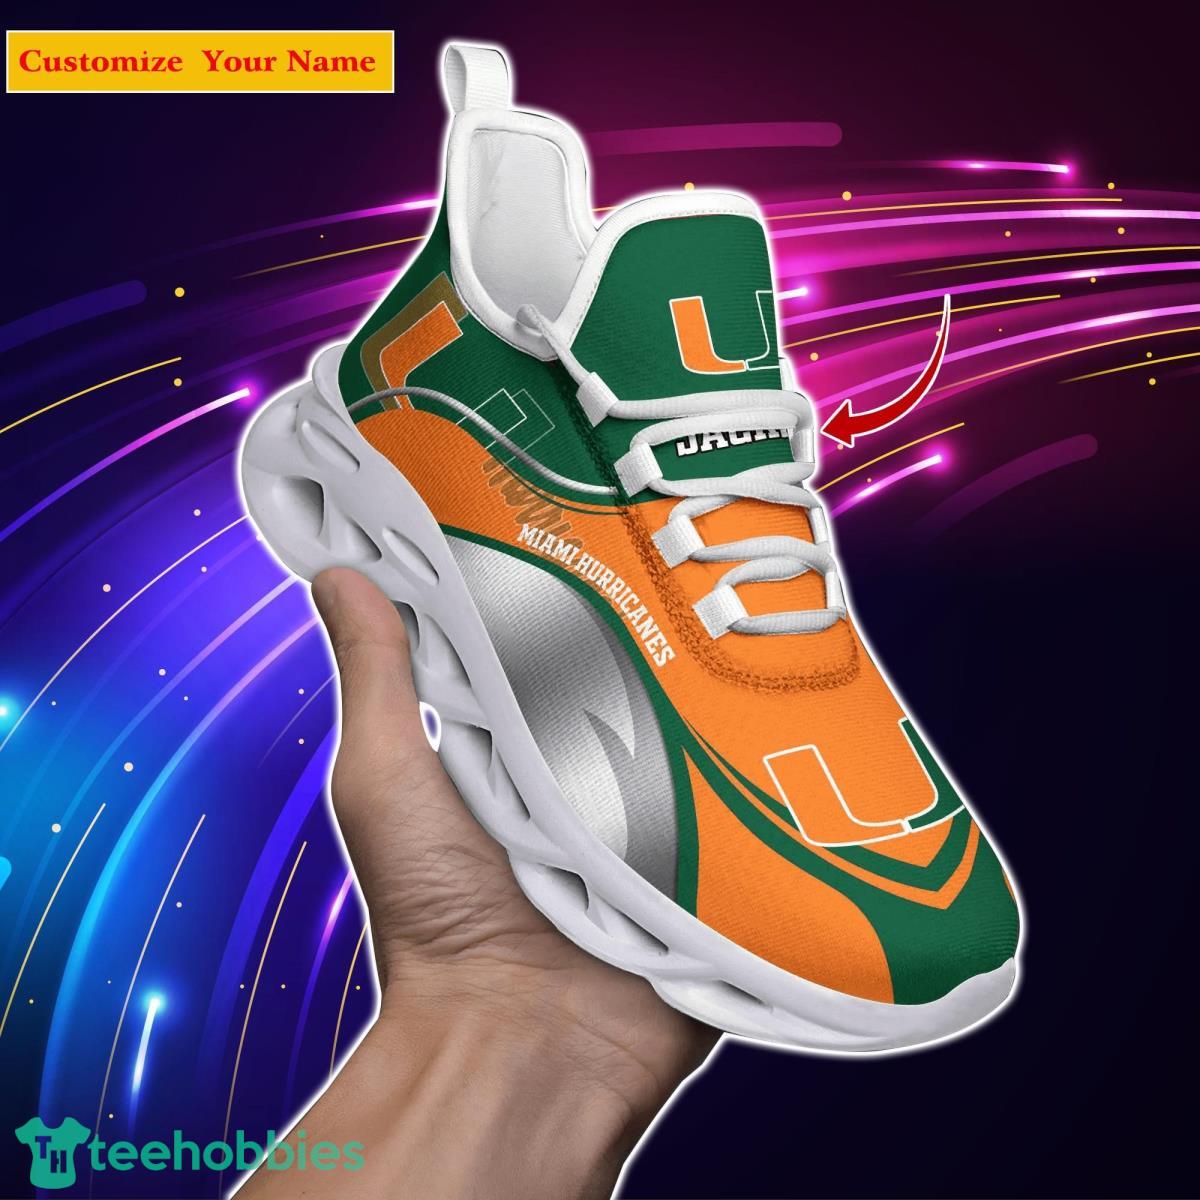 Miami Hurricanes NCAA1 Custom Name Max Soul Shoes Unique Gift For Men Women Fans Product Photo 1